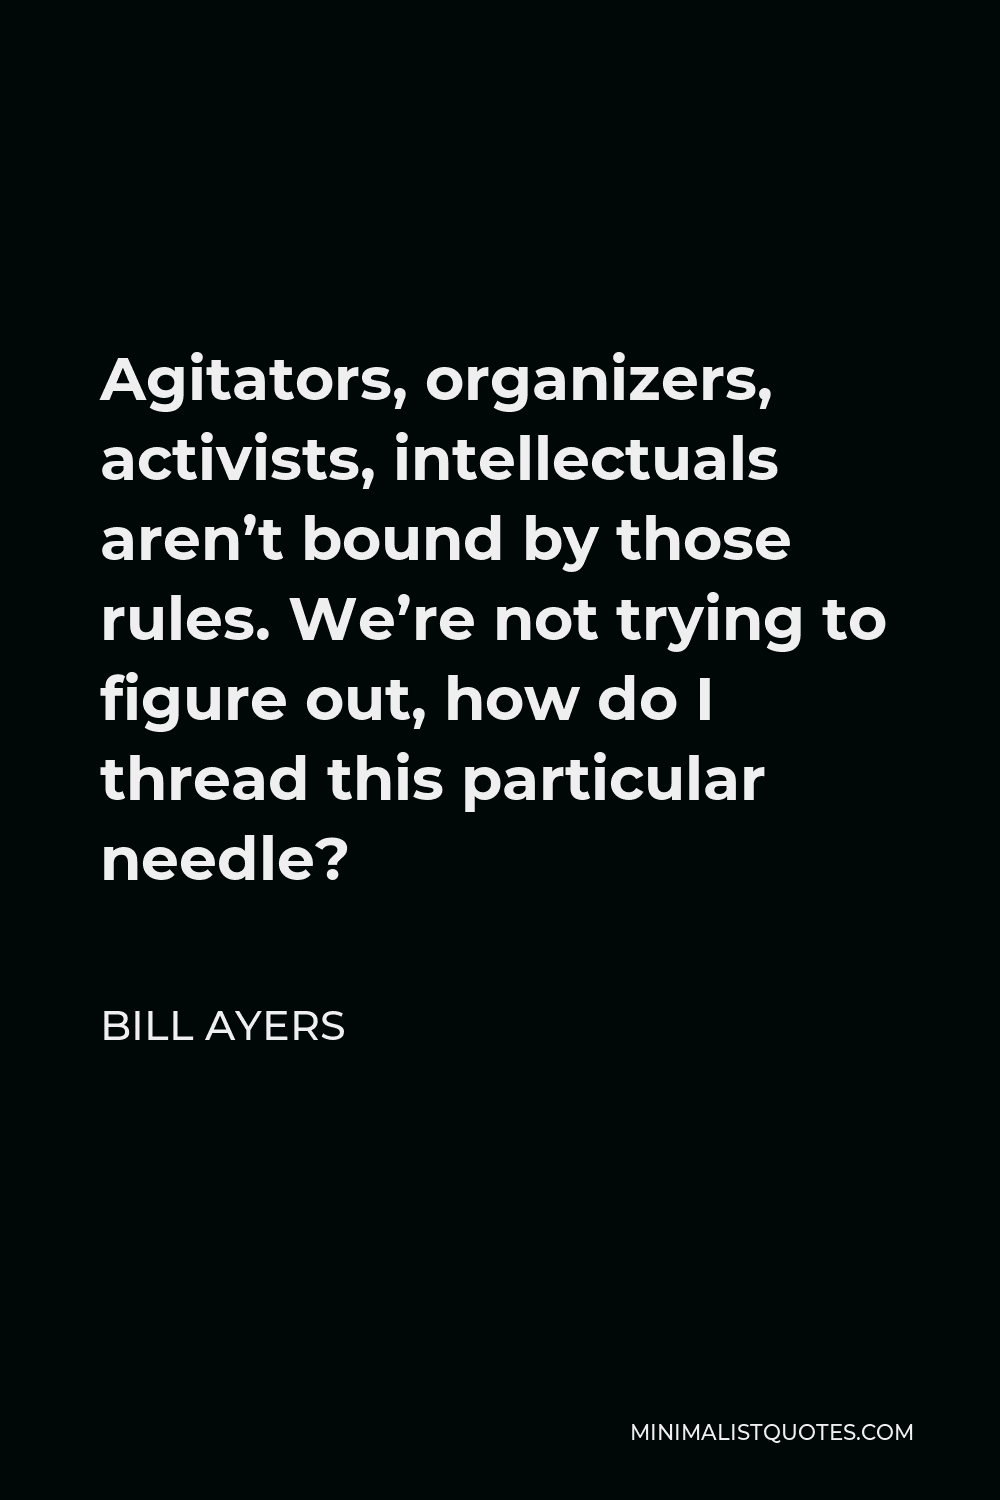 Bill Ayers Quote - Agitators, organizers, activists, intellectuals aren’t bound by those rules. We’re not trying to figure out, how do I thread this particular needle?